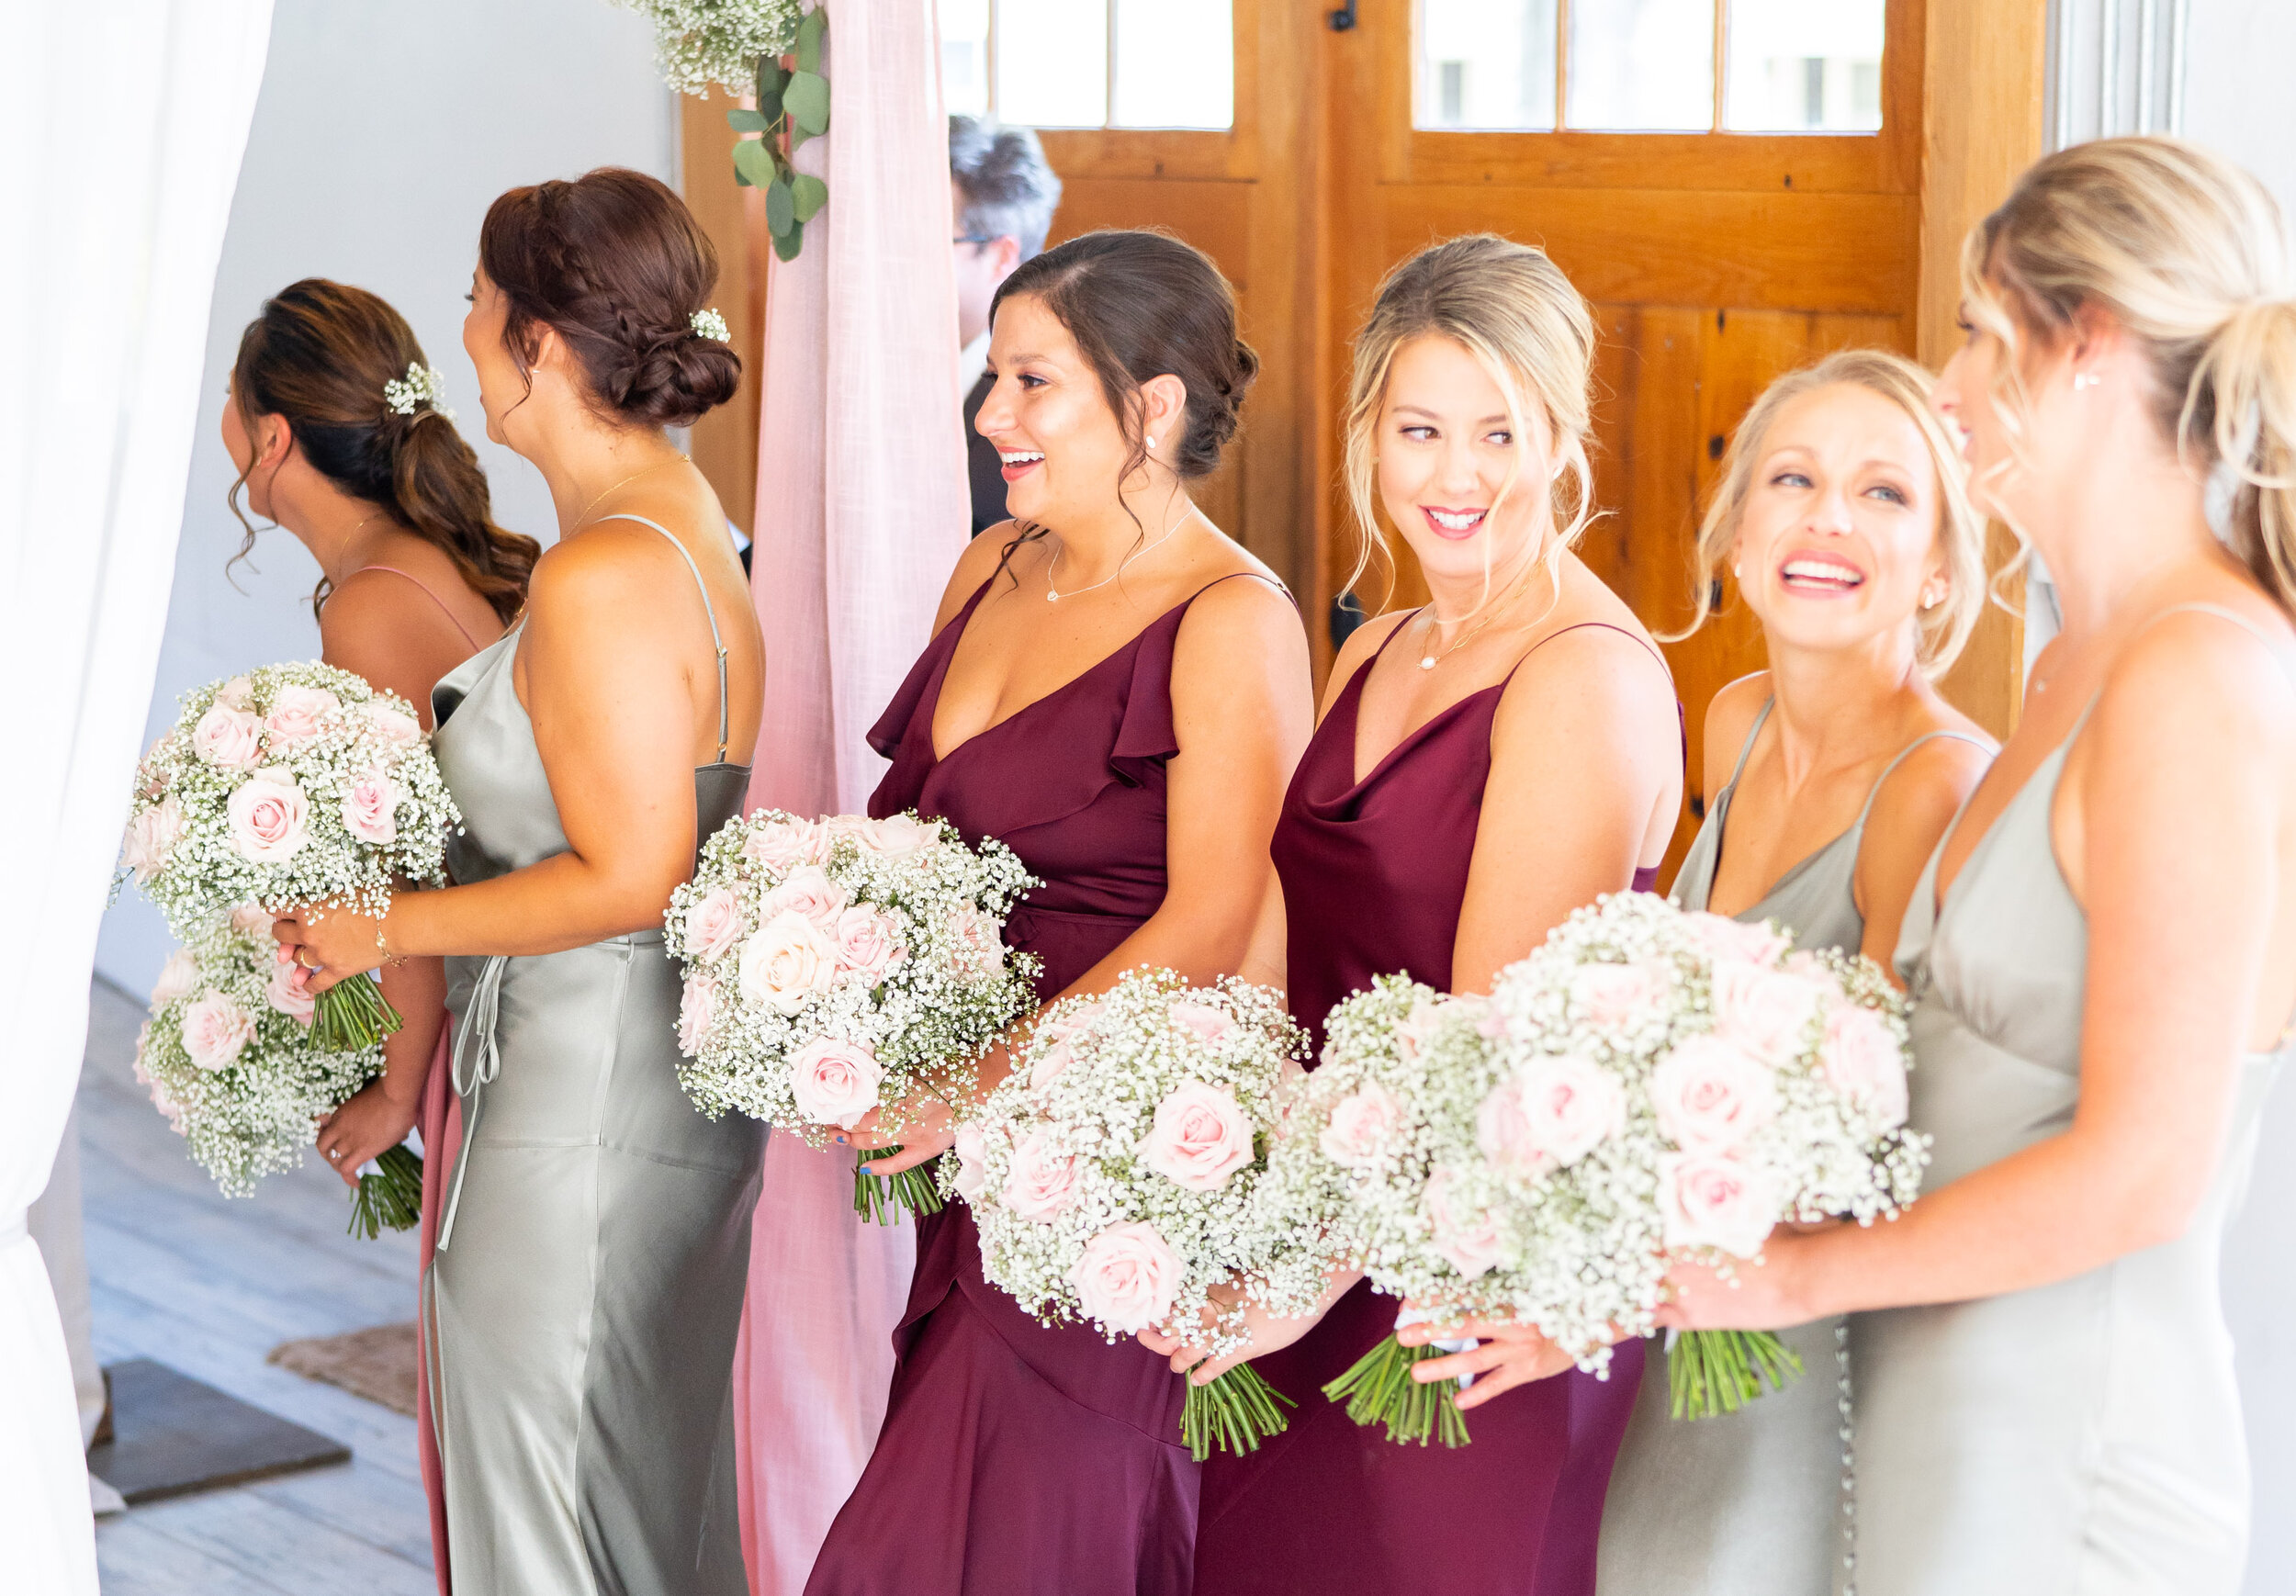 Bridesmaids in sage, burgundy and ballet dresses with baby's breath and blush roses